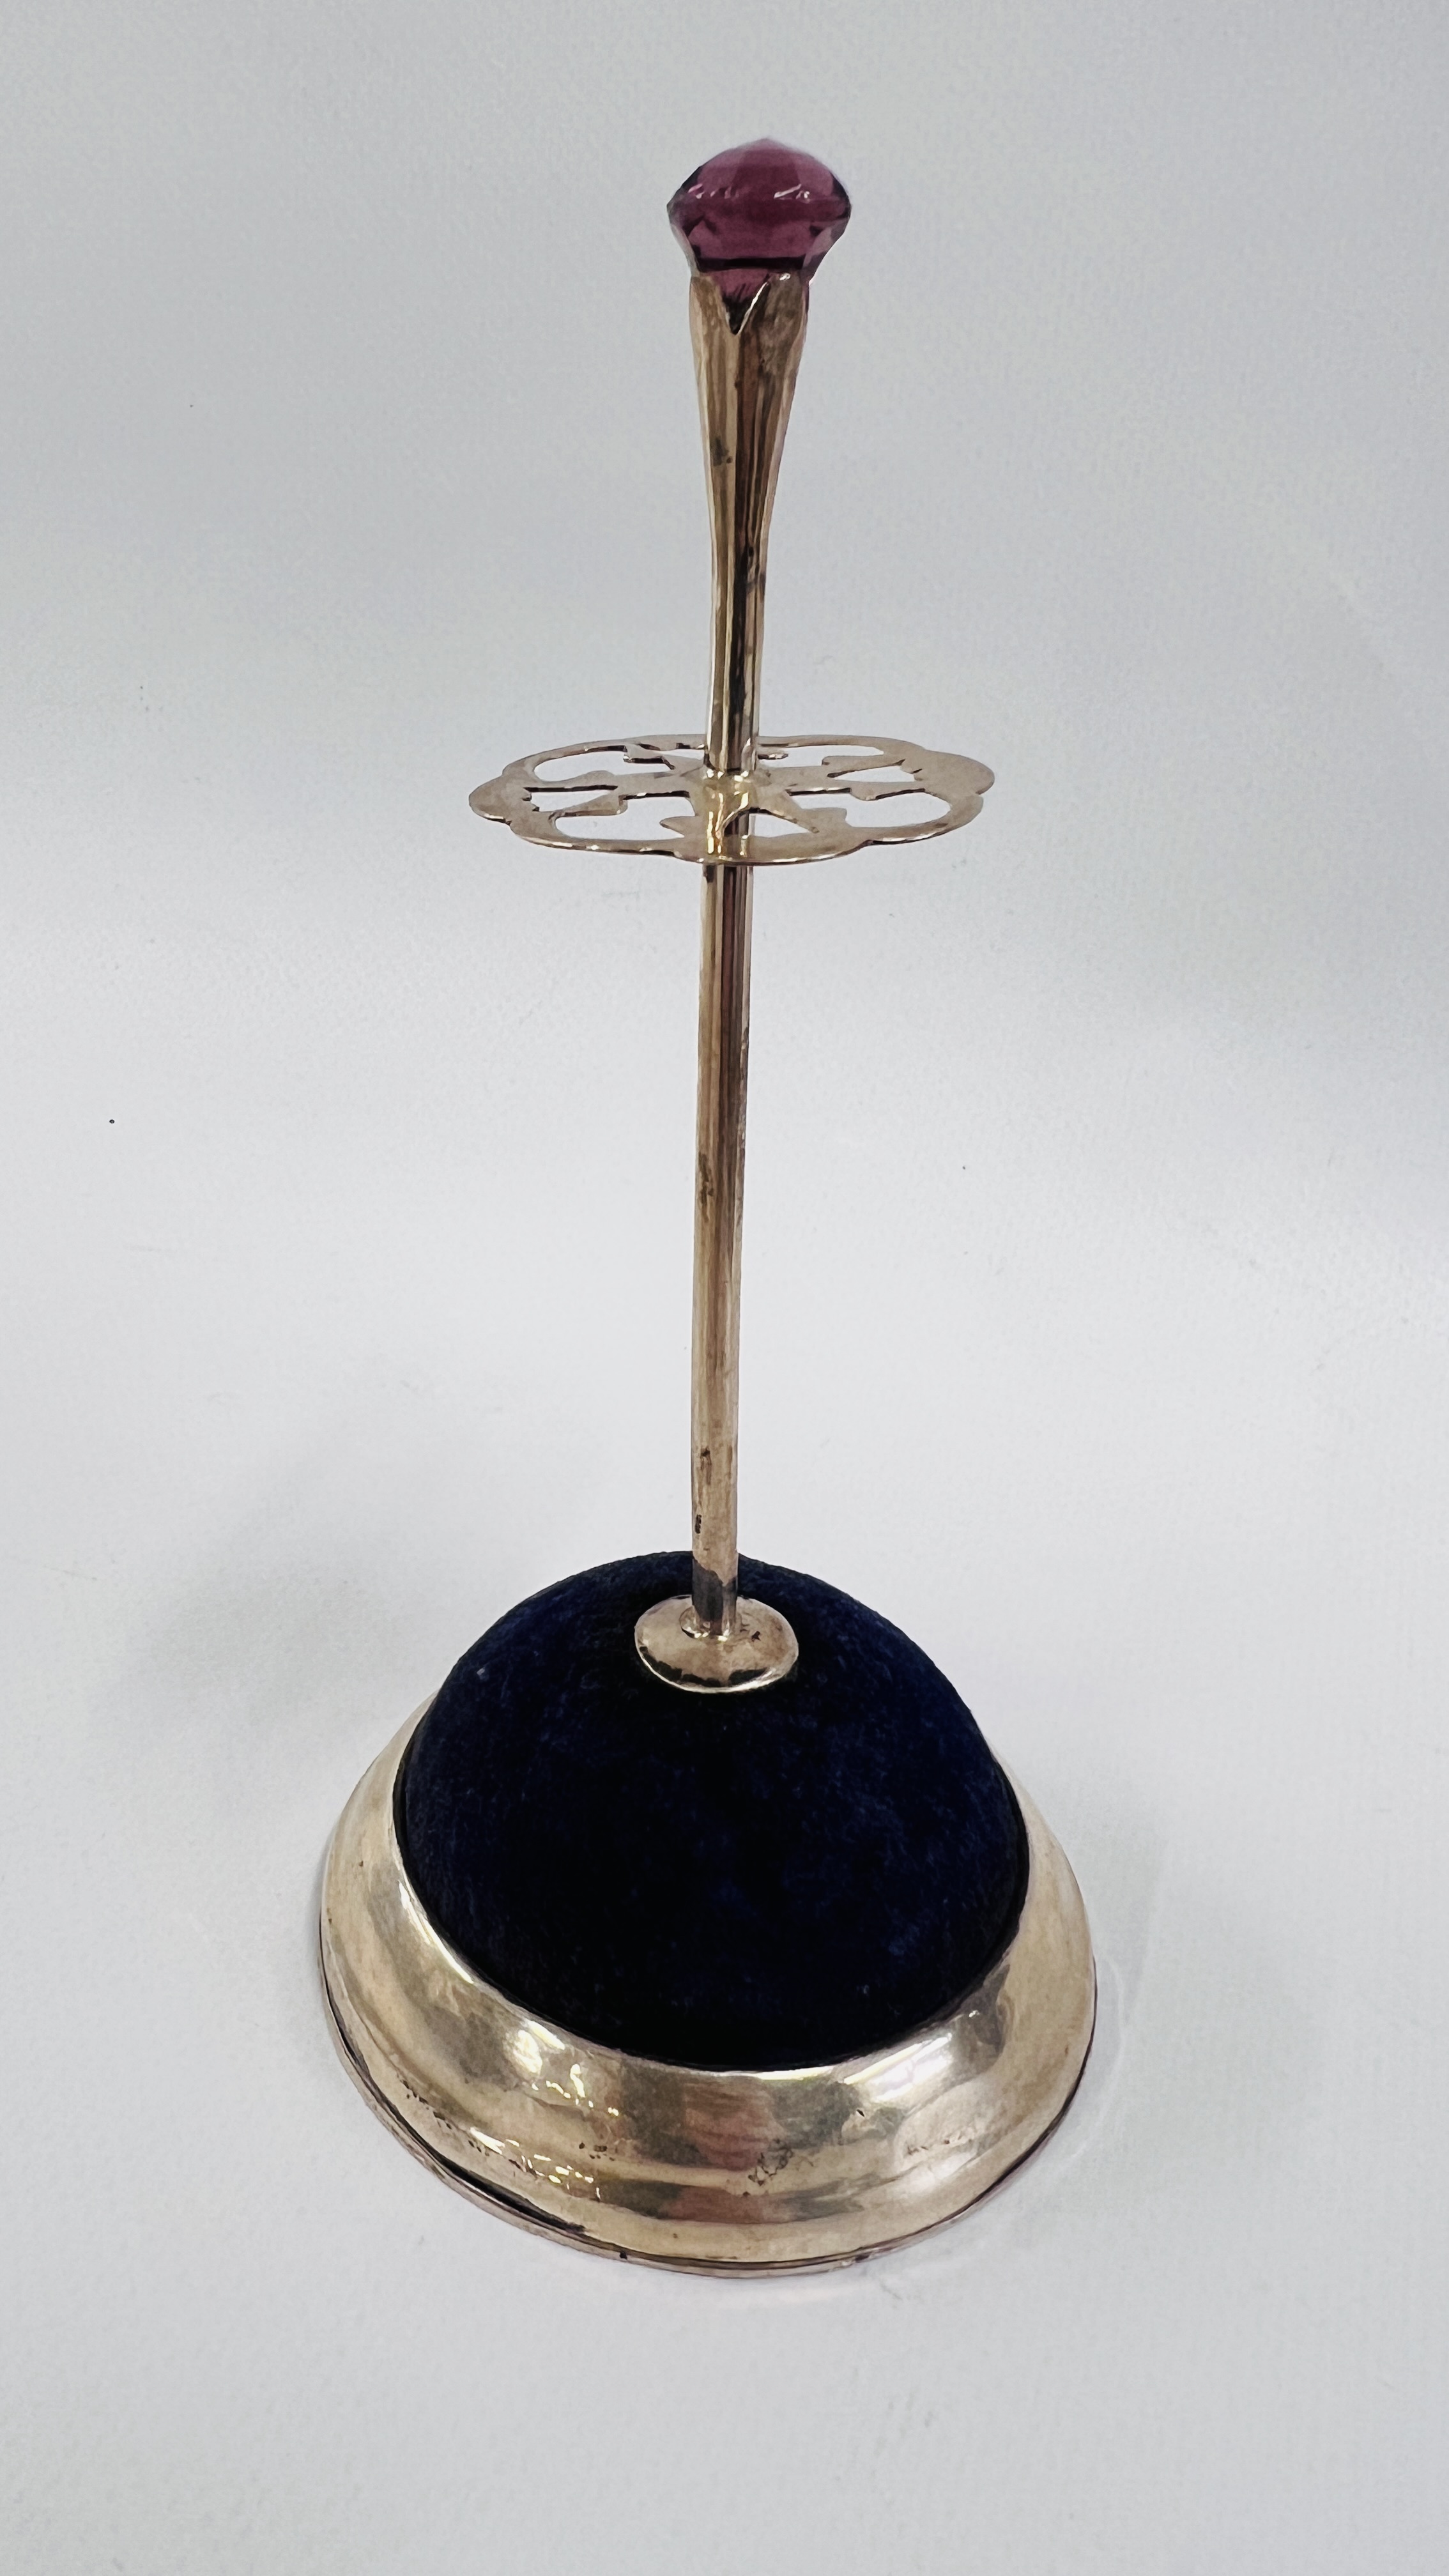 AN ANTIQUE SCOTTISH INSPIRED SILVER HAT PIN STAND, THE FINIAL SET WITH AN AMETHYST COLOURED STONE,